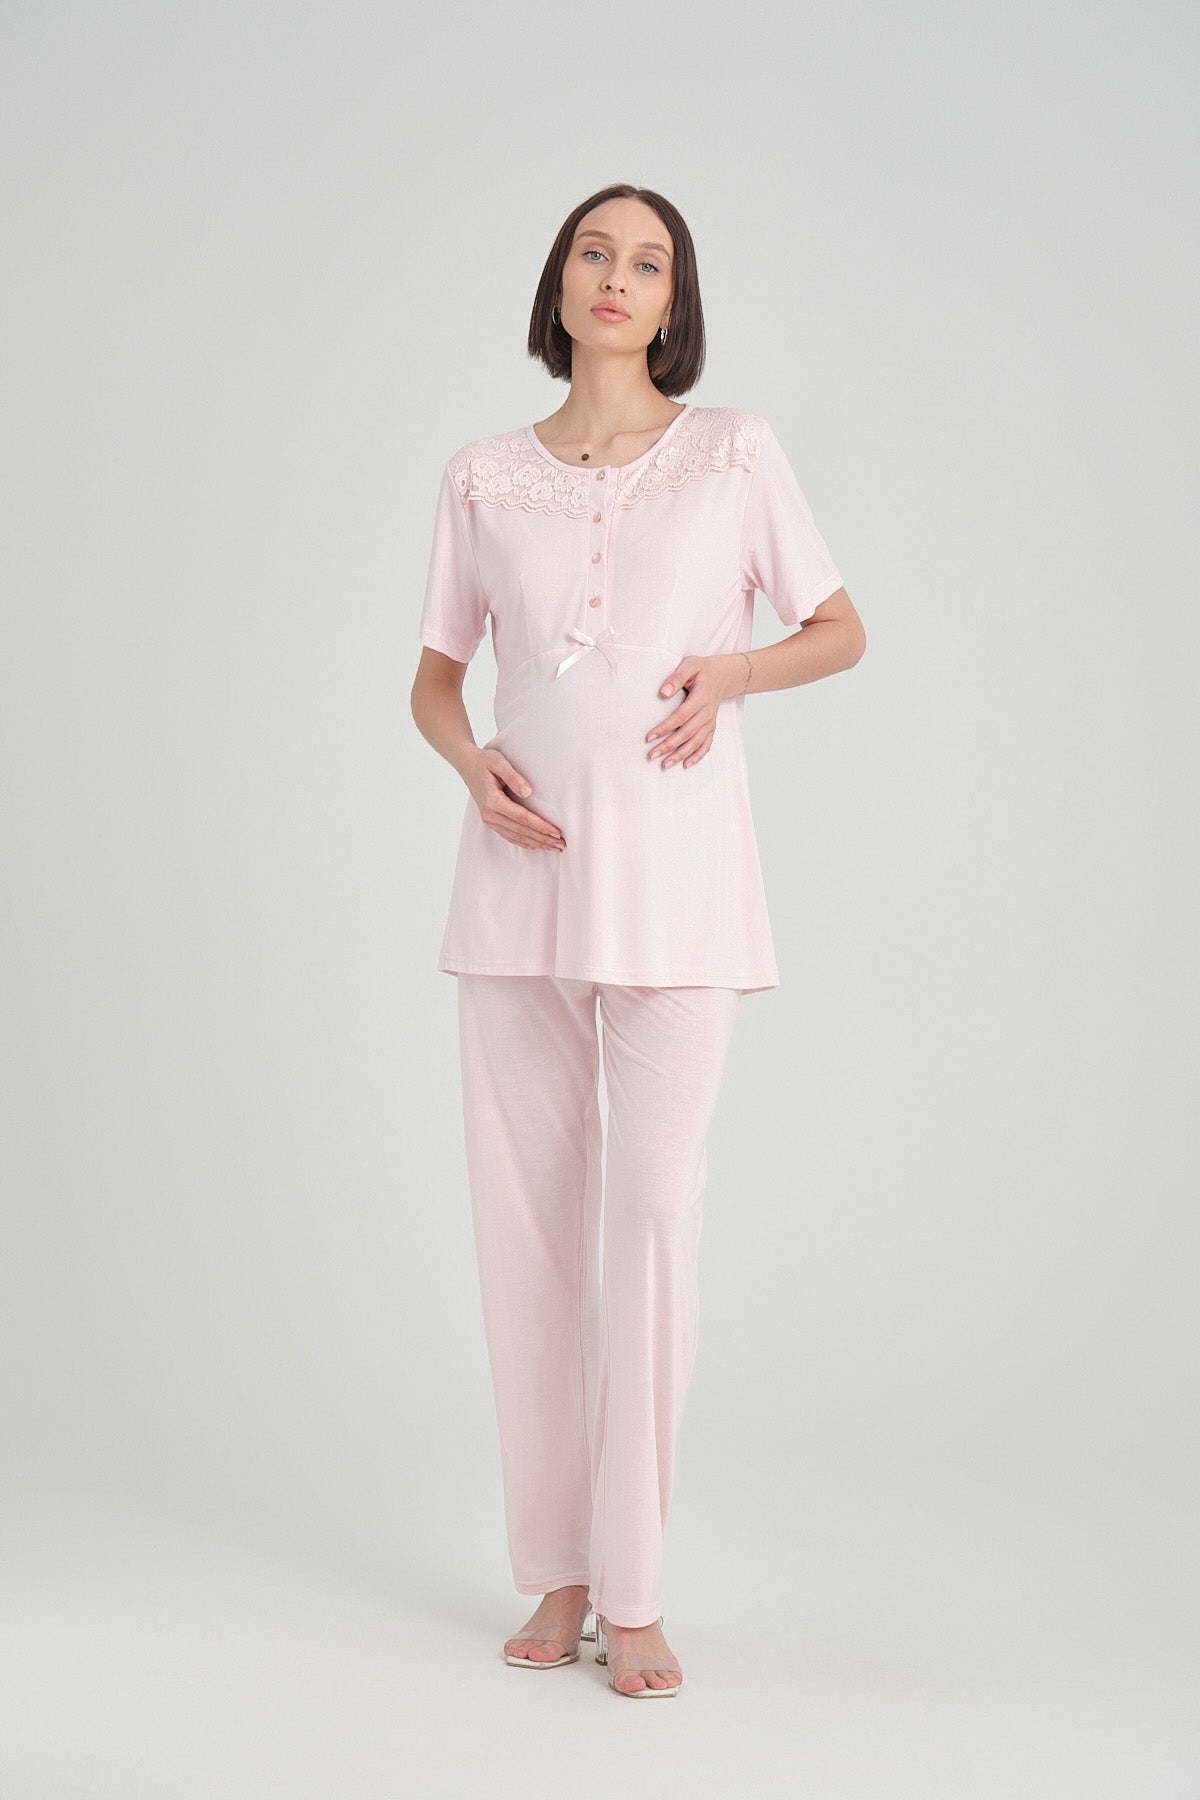 Shopymommy 2369 Lace Collar 3-Pieces Maternity & Nursing Pajamas With Stripe Robe Pink